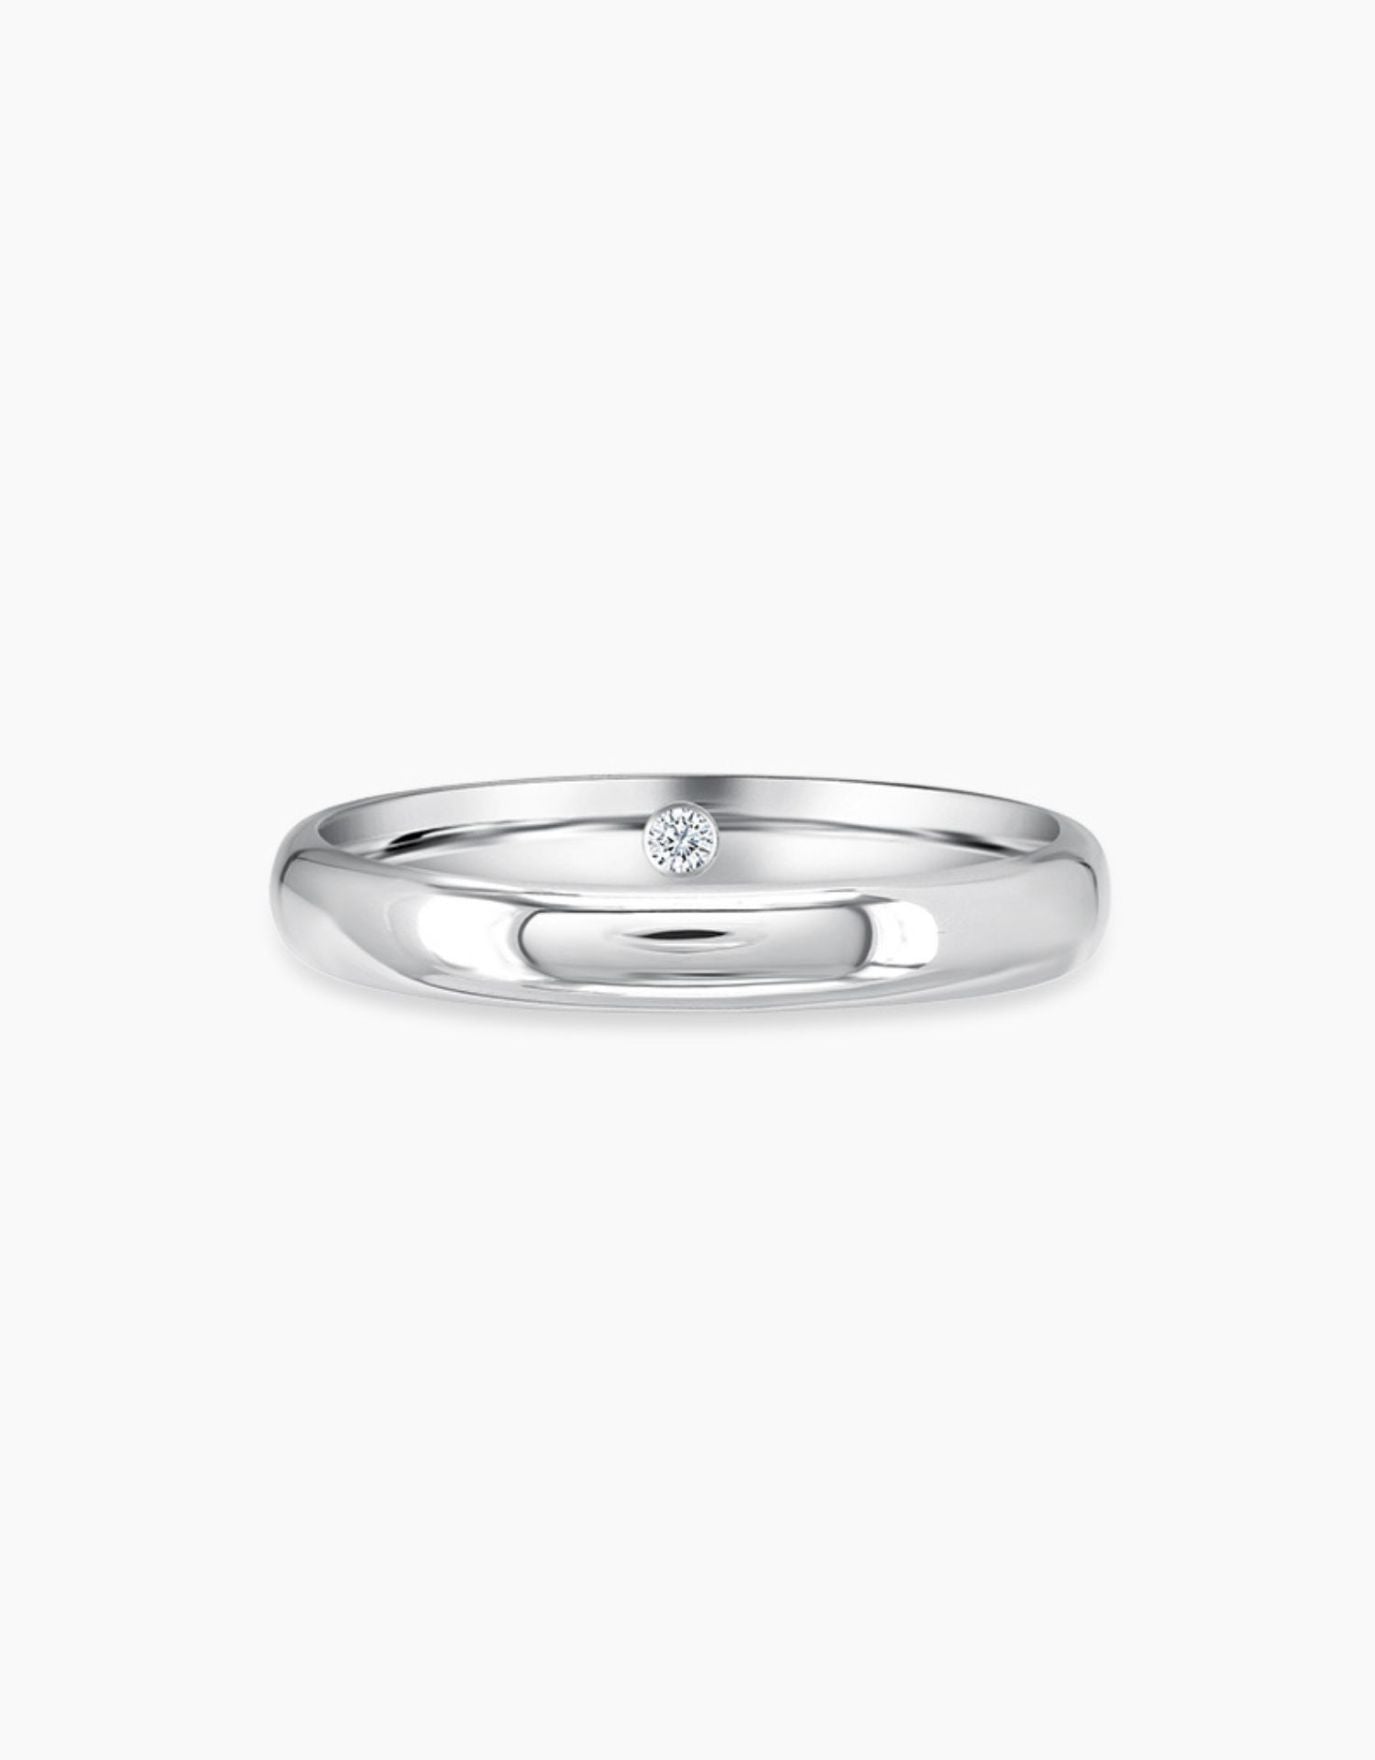 LVC Classique Wedding Band in White Gold with an Inner Diamond